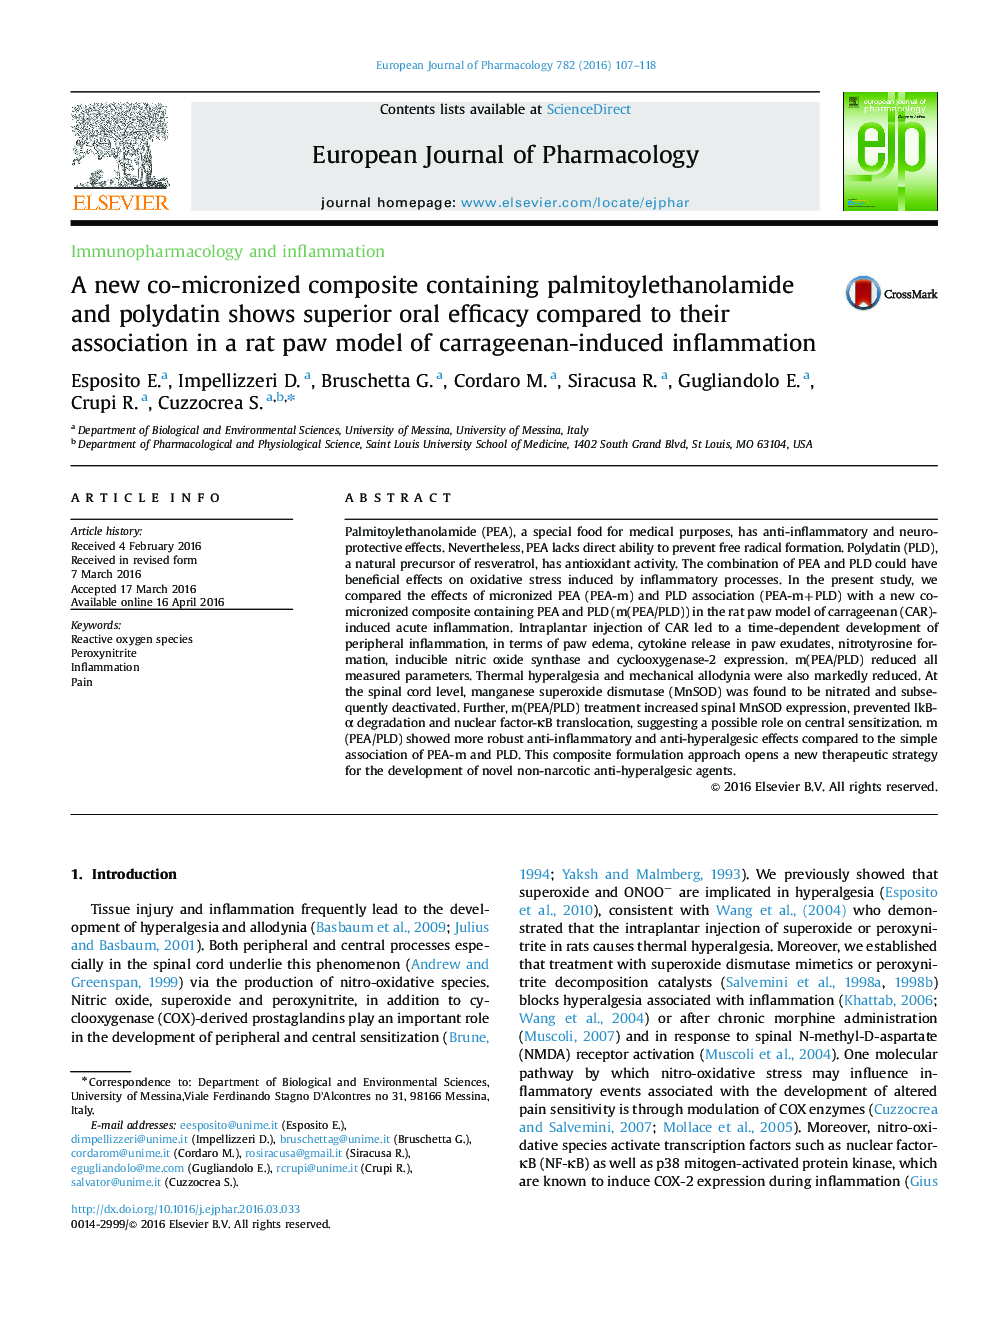 Immunopharmacology and inflammationA new co-micronized composite containing palmitoylethanolamide and polydatin shows superior oral efficacy compared to their association in a rat paw model of carrageenan-induced inflammation